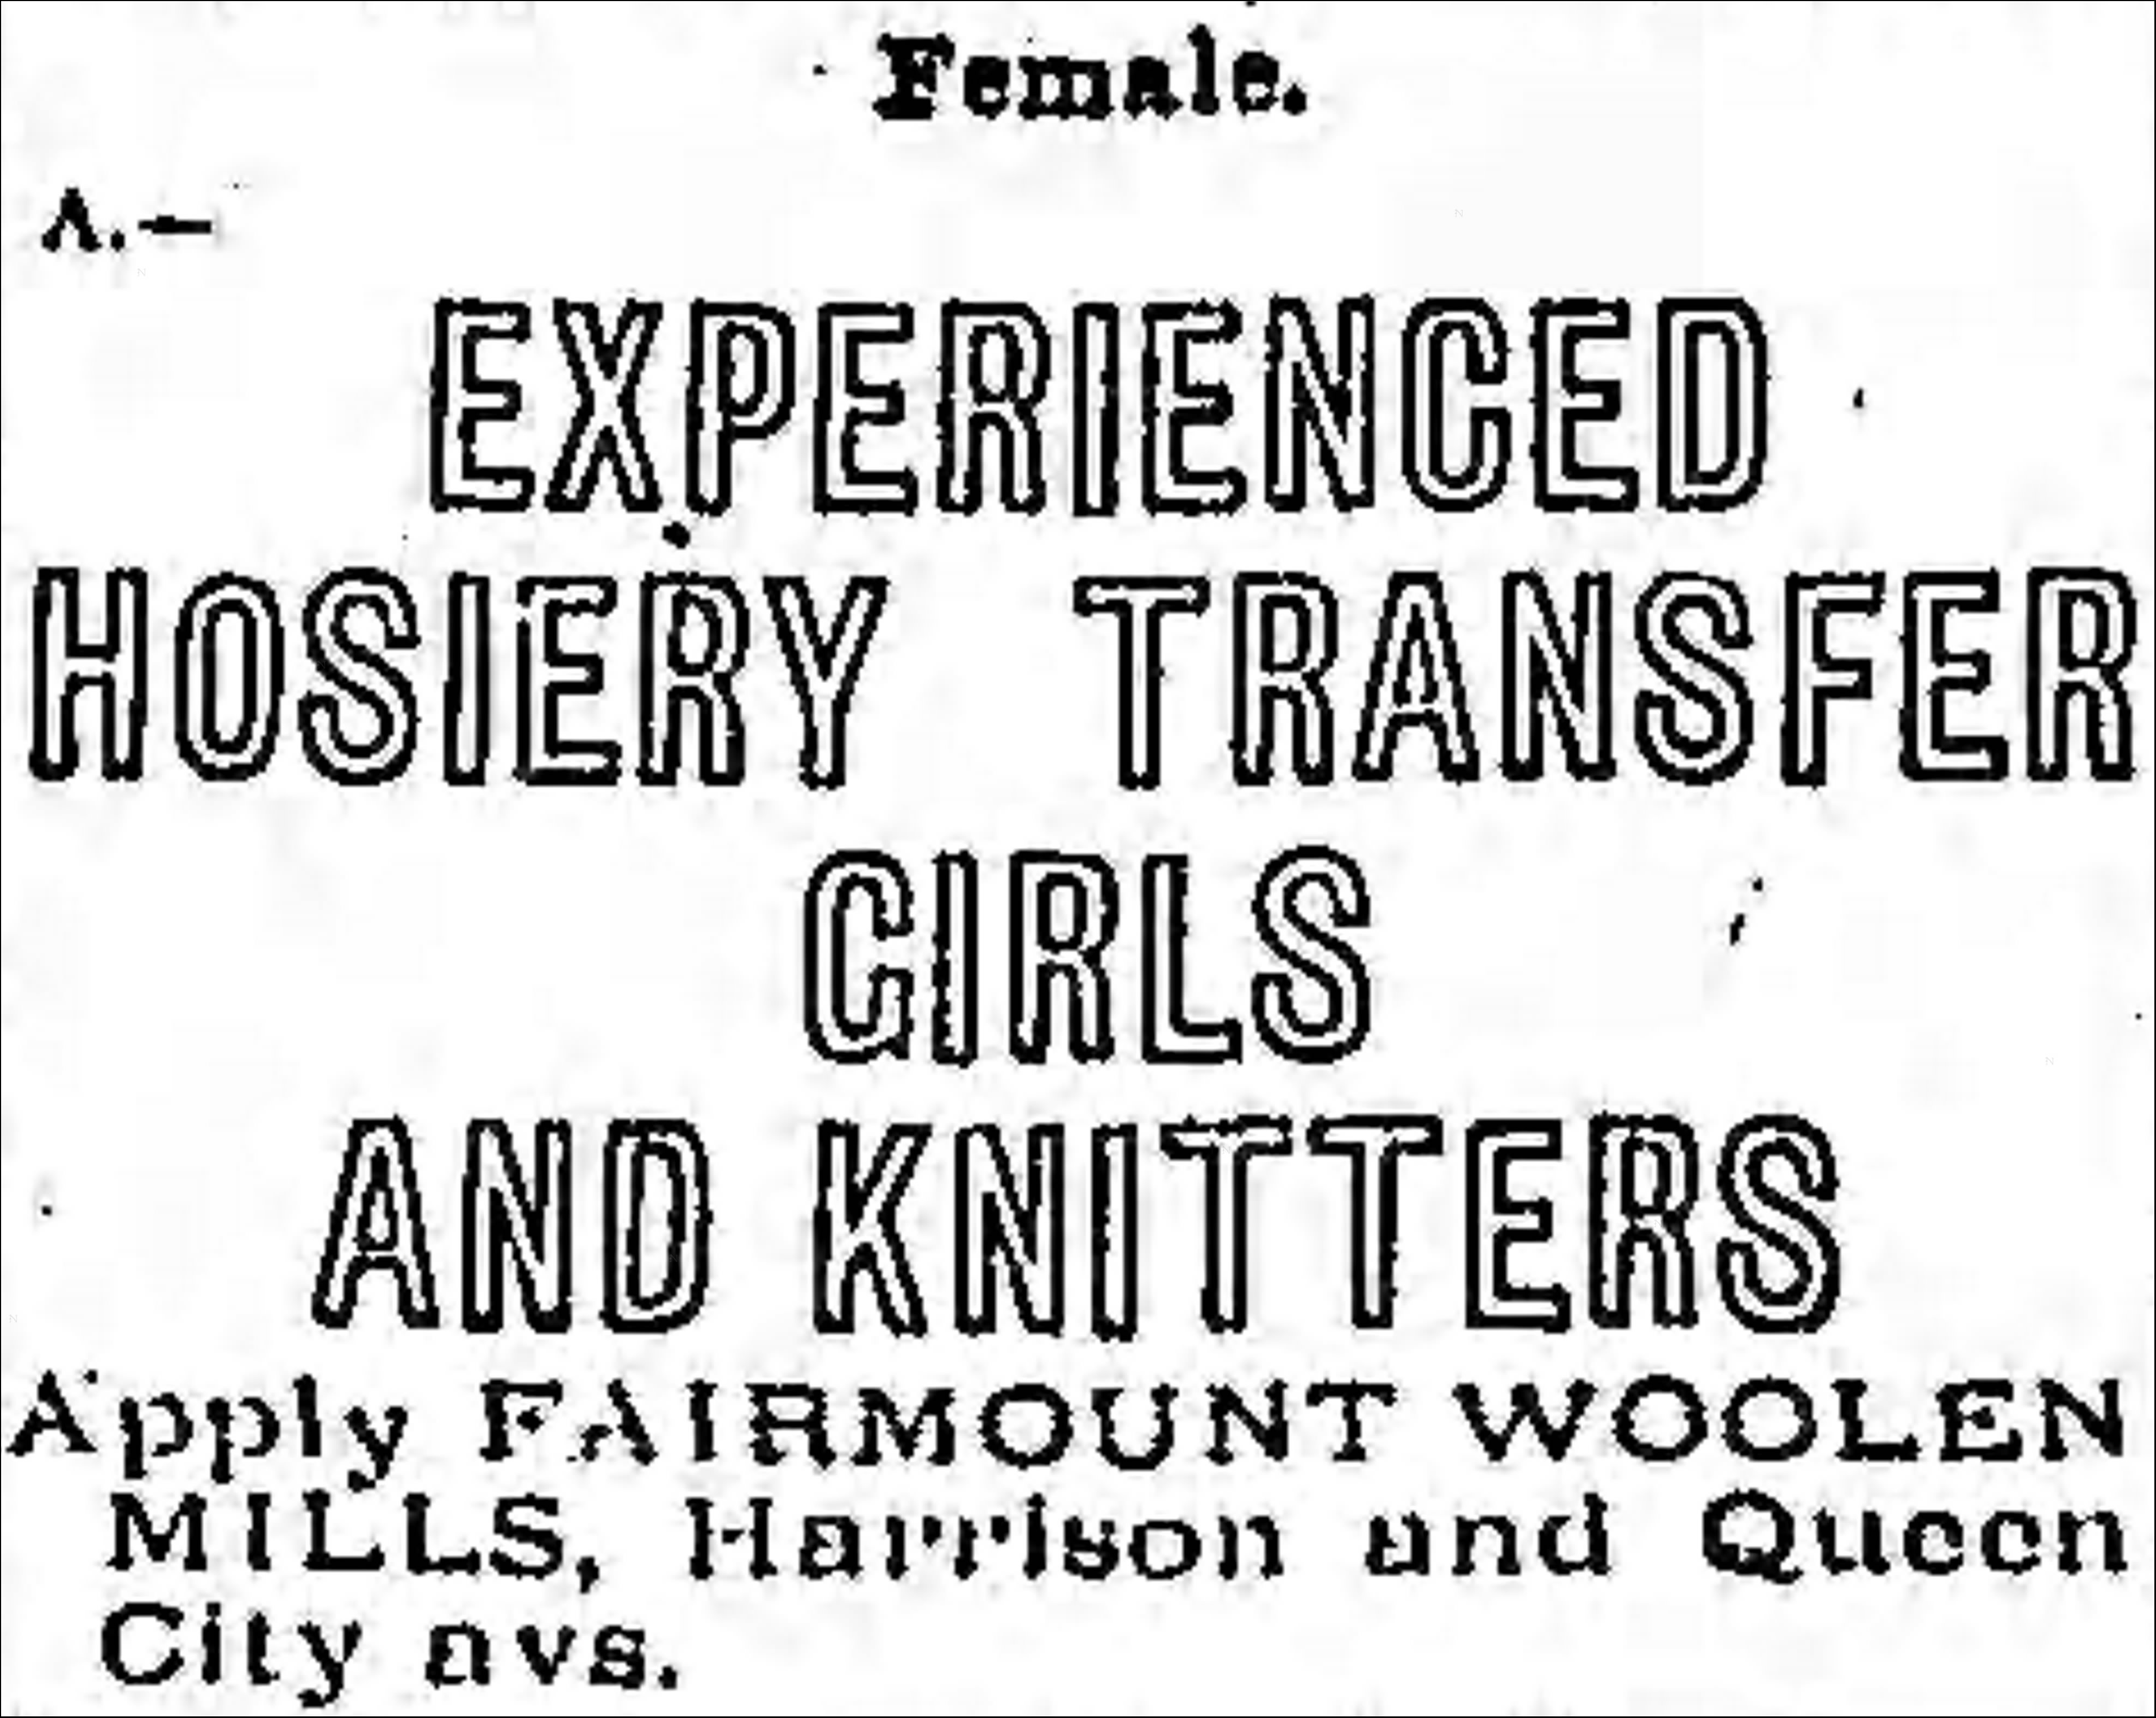 1915 ad for female workers at the Fairmount Woolen Mill